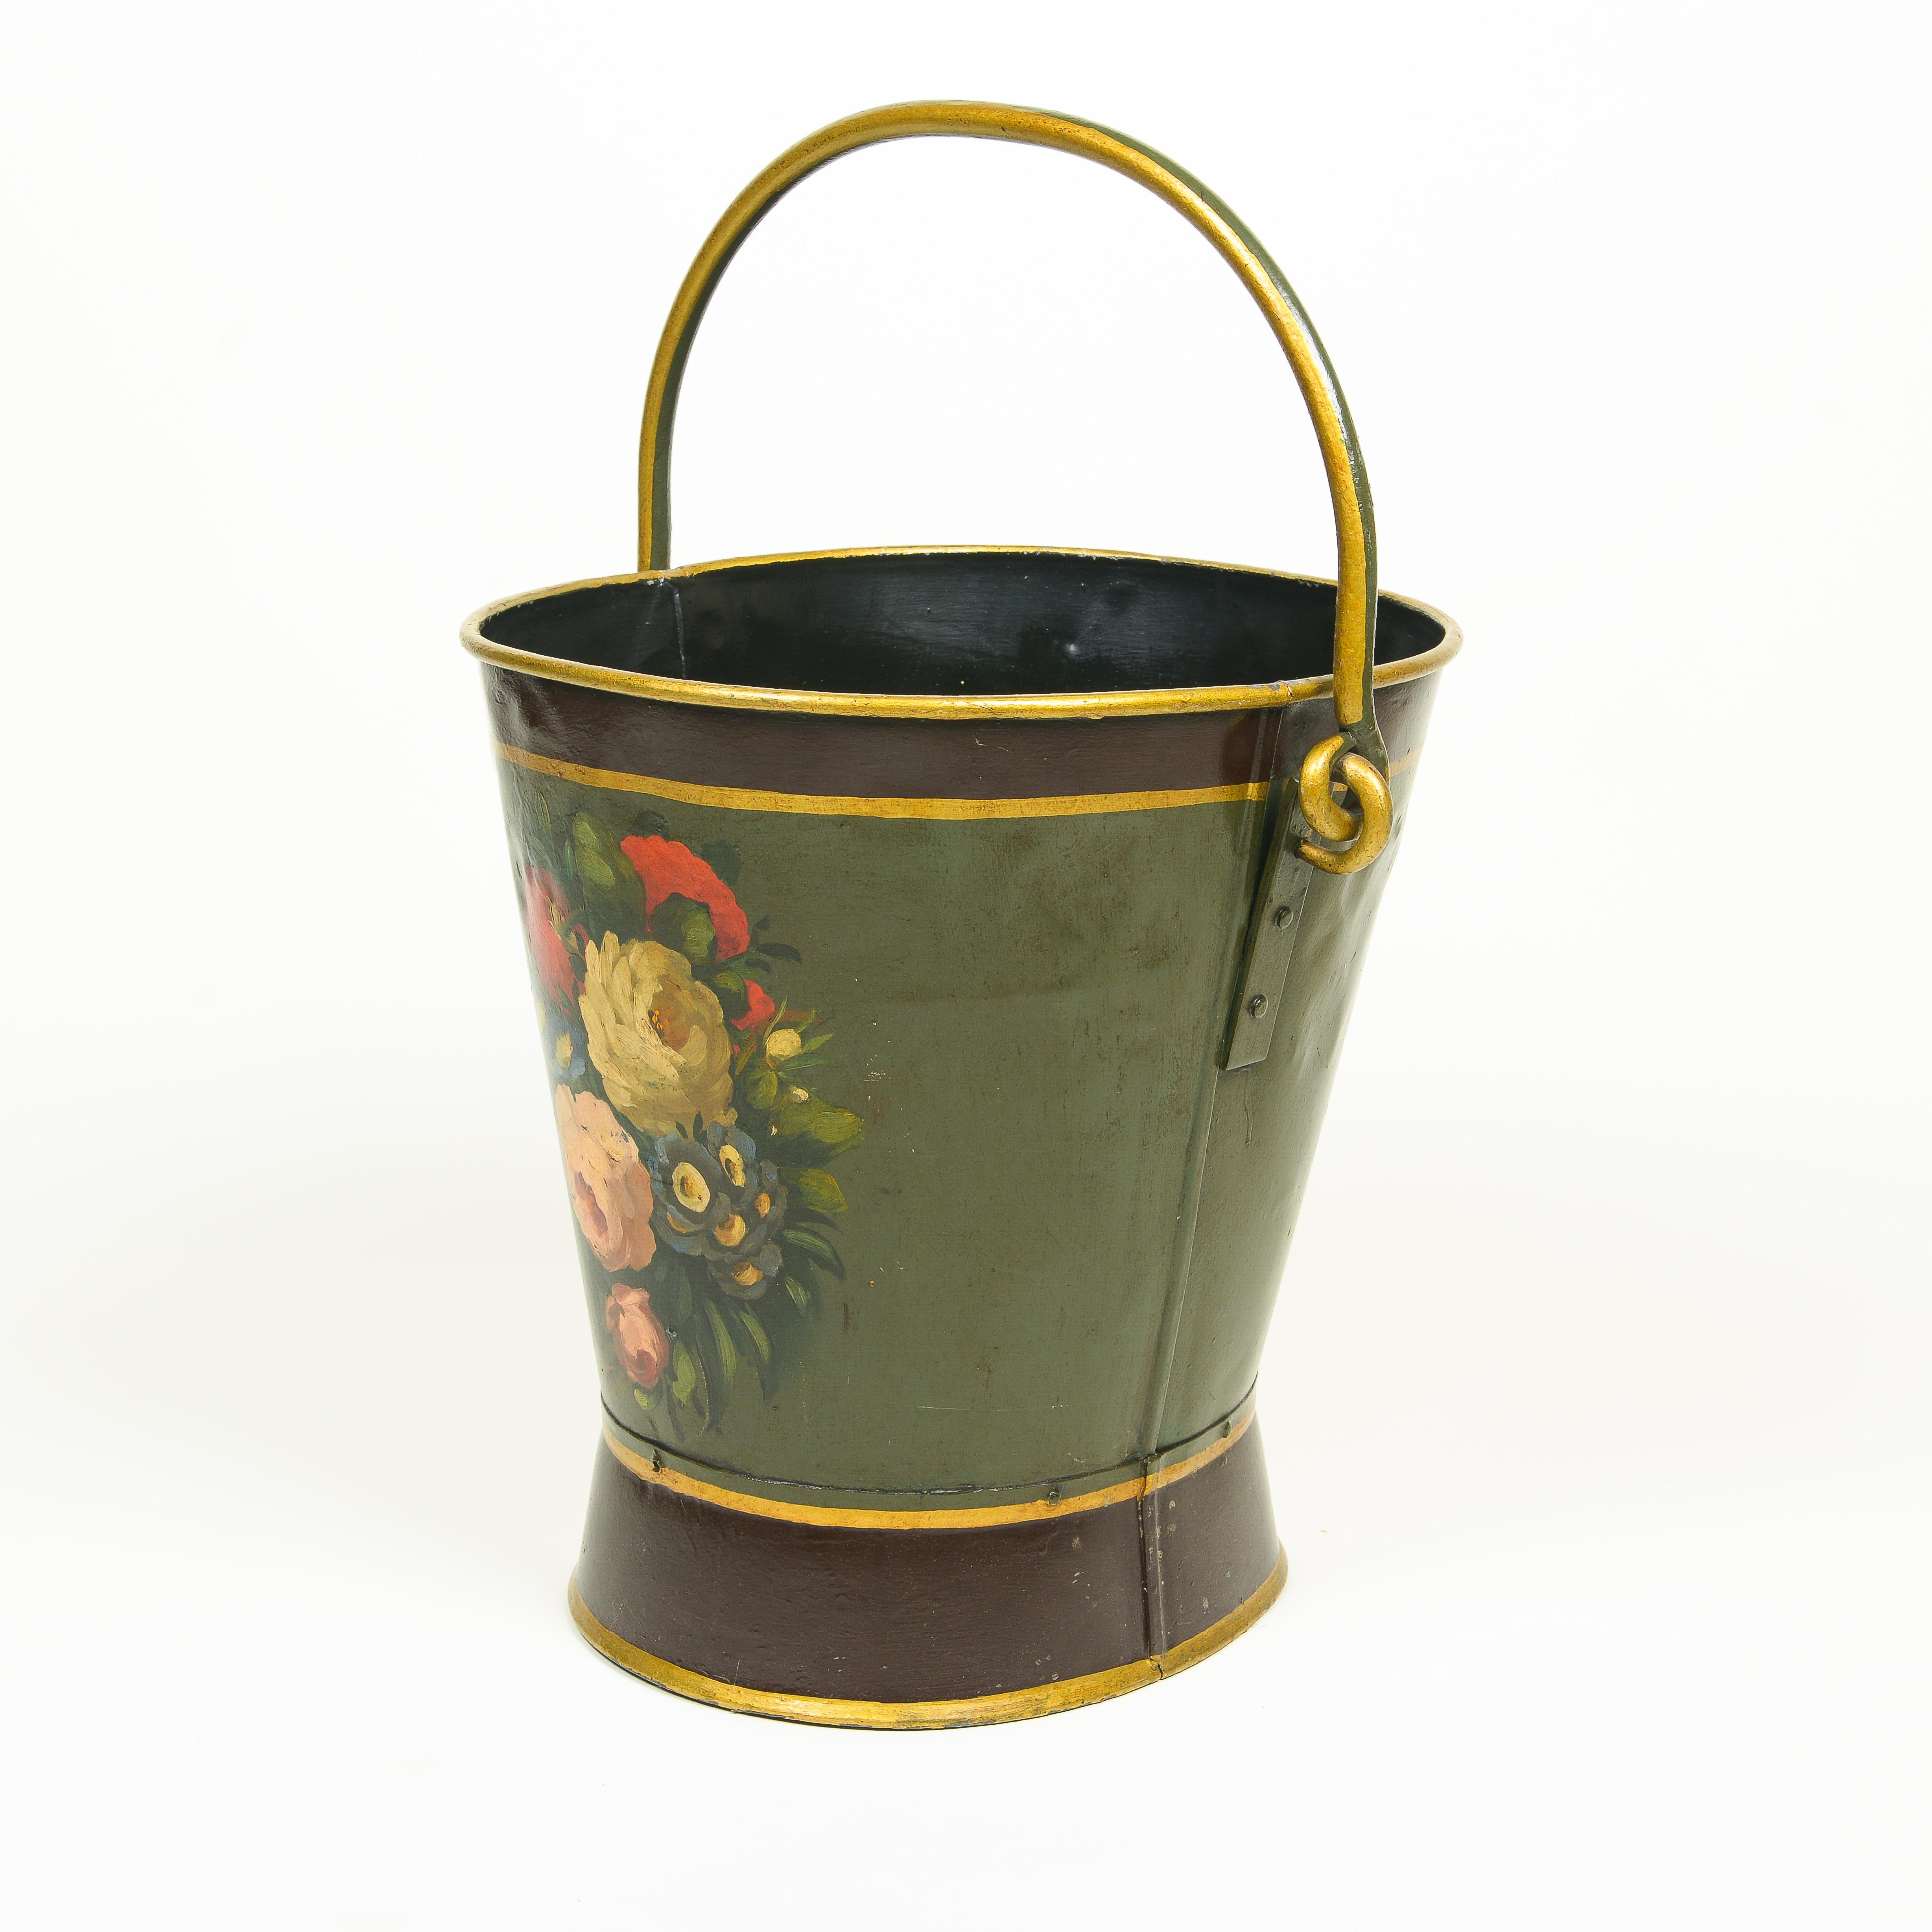 Of round tapering form with flared base; painted with roses and other various flowers on a moss green ground with gilt banding; mounted with carrying handle.